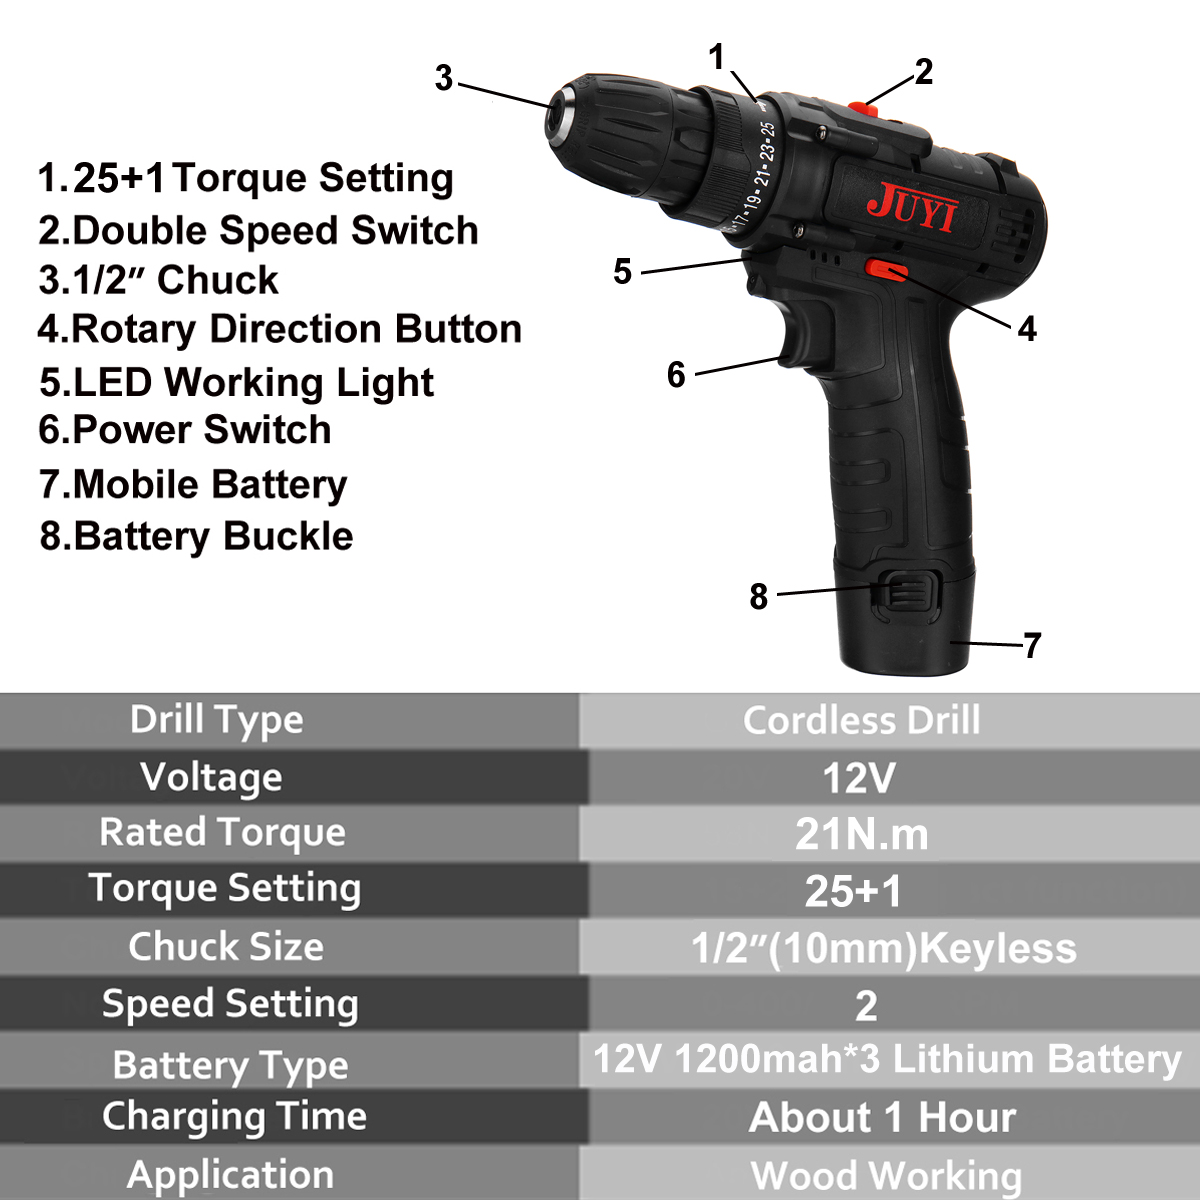 JUYI-12V24V-Lithium-Battery-Power-Drill-Cordless-Rechargeable-2-Speed-Electric-Driver-Drill-Motor-Re-1557976-3